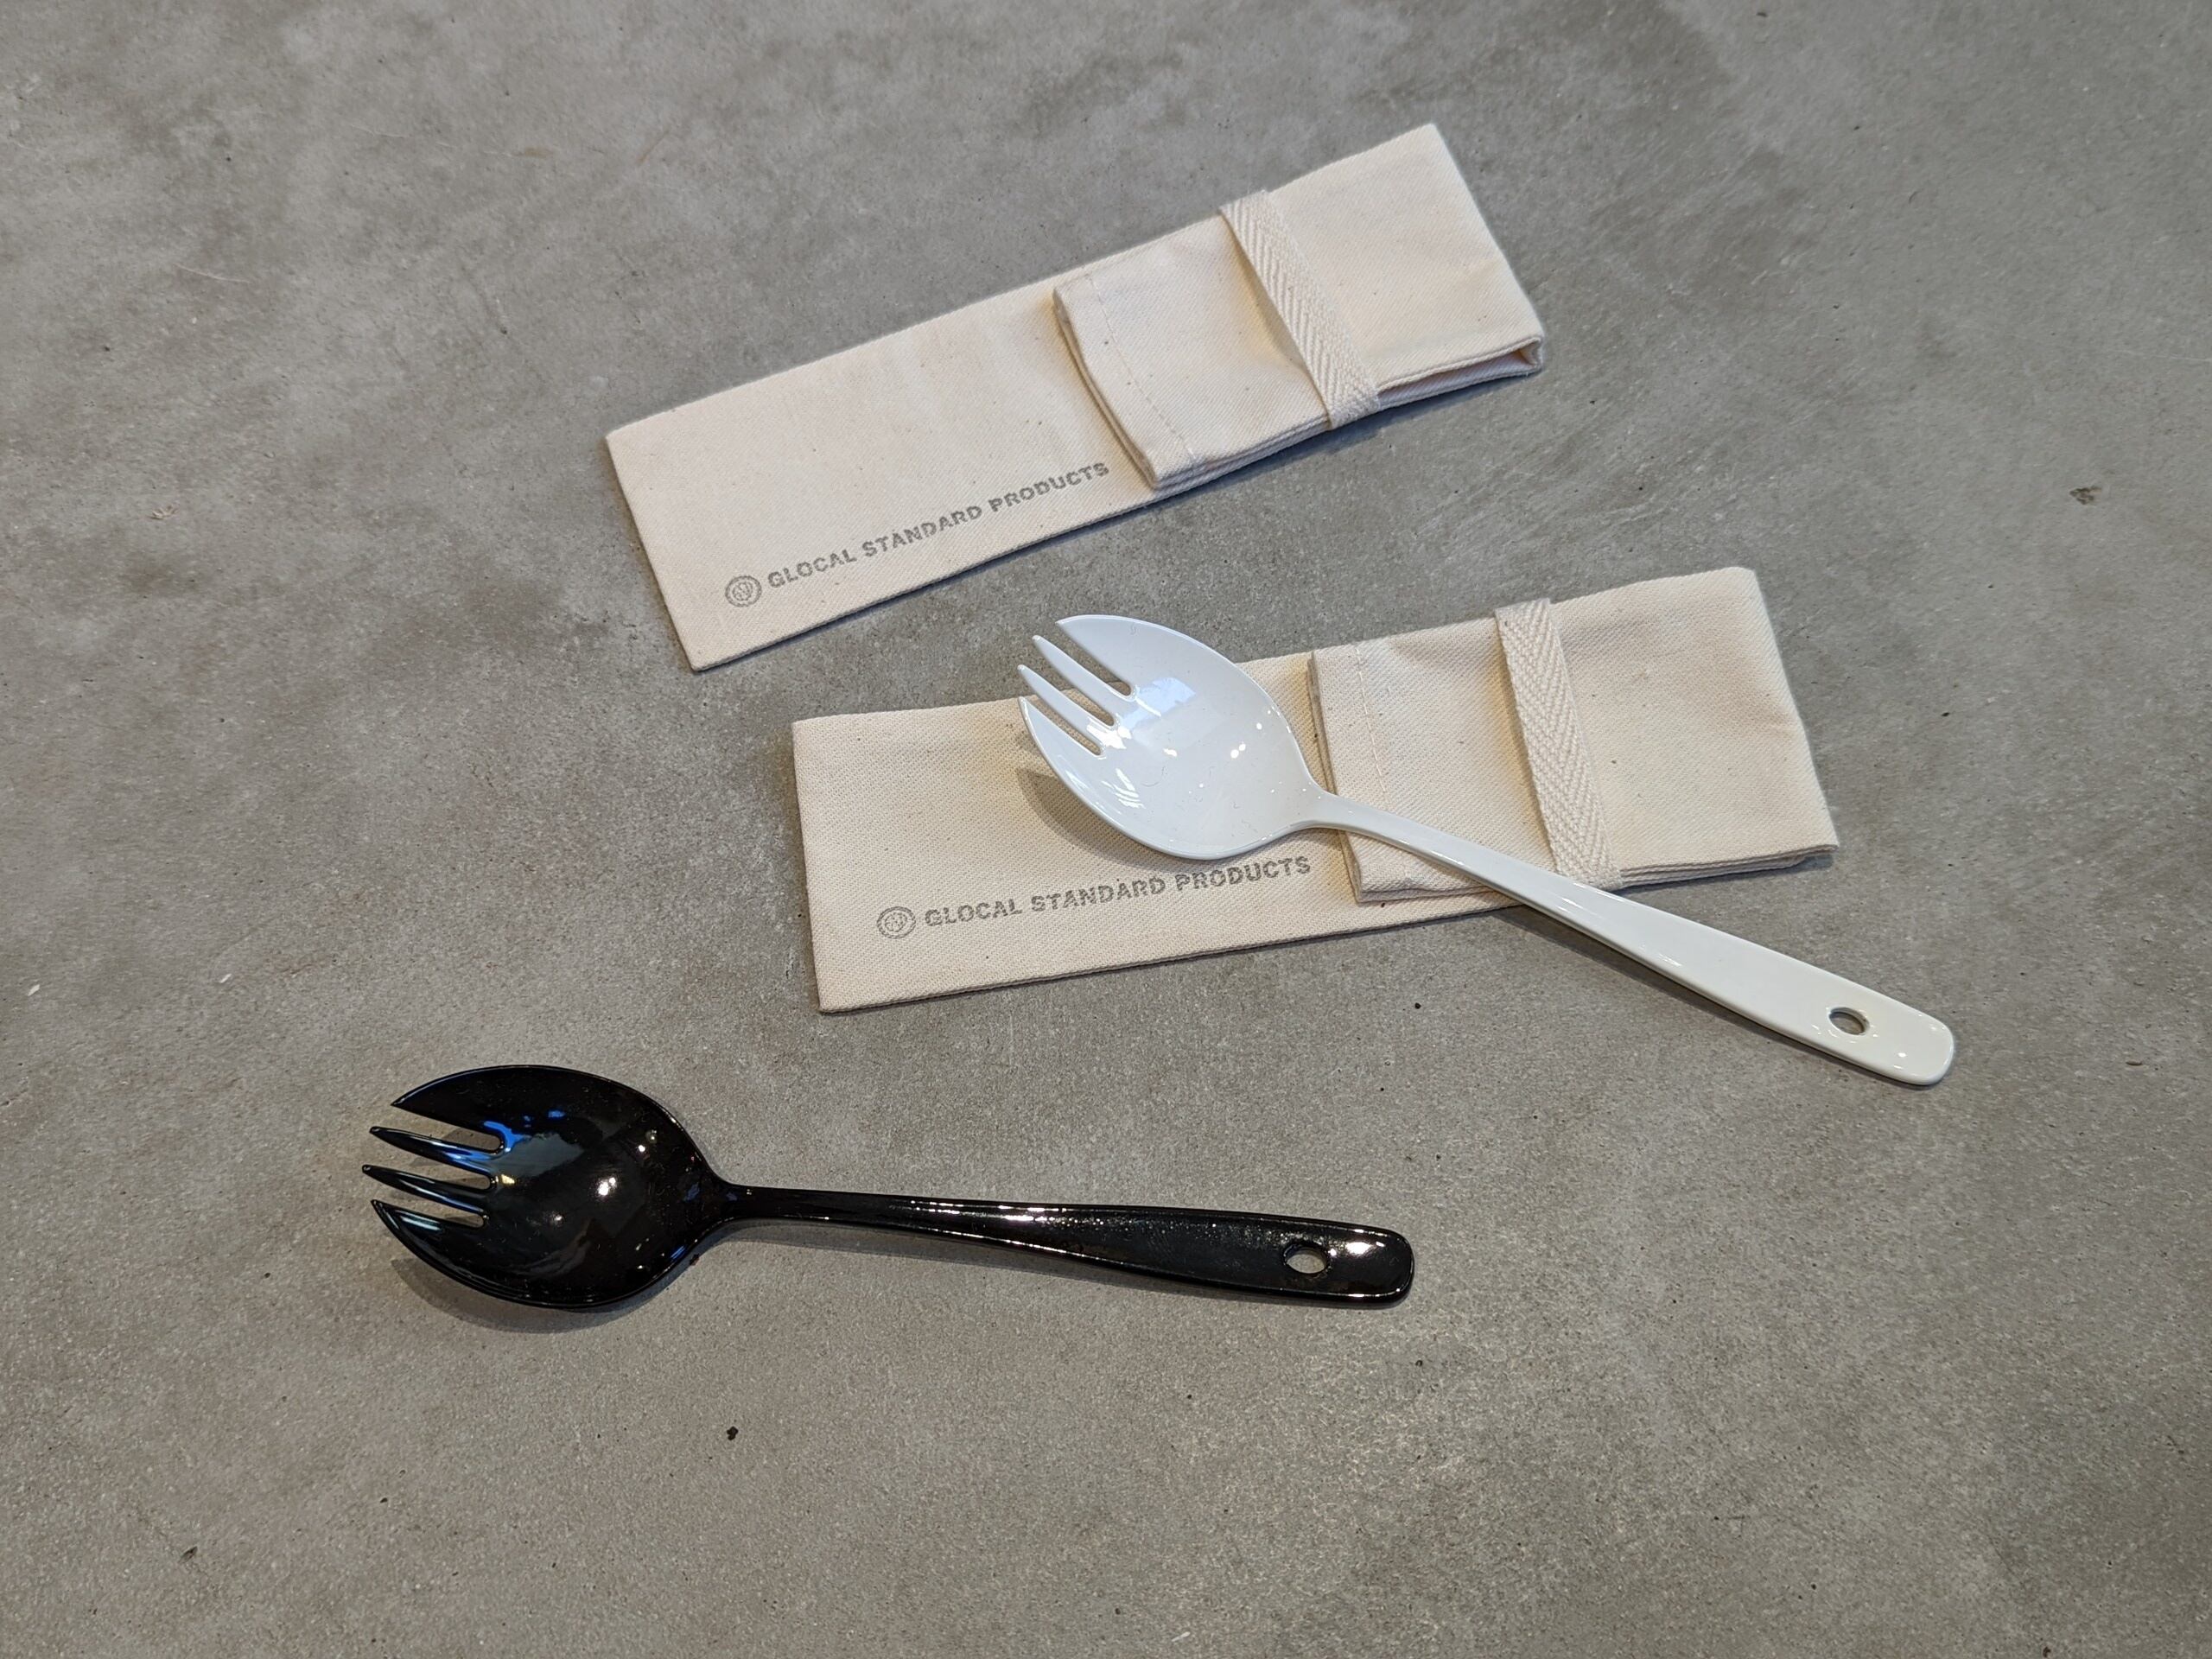 TSUBAME Spork　|　GLOCAL STANDARD PRODUCTS